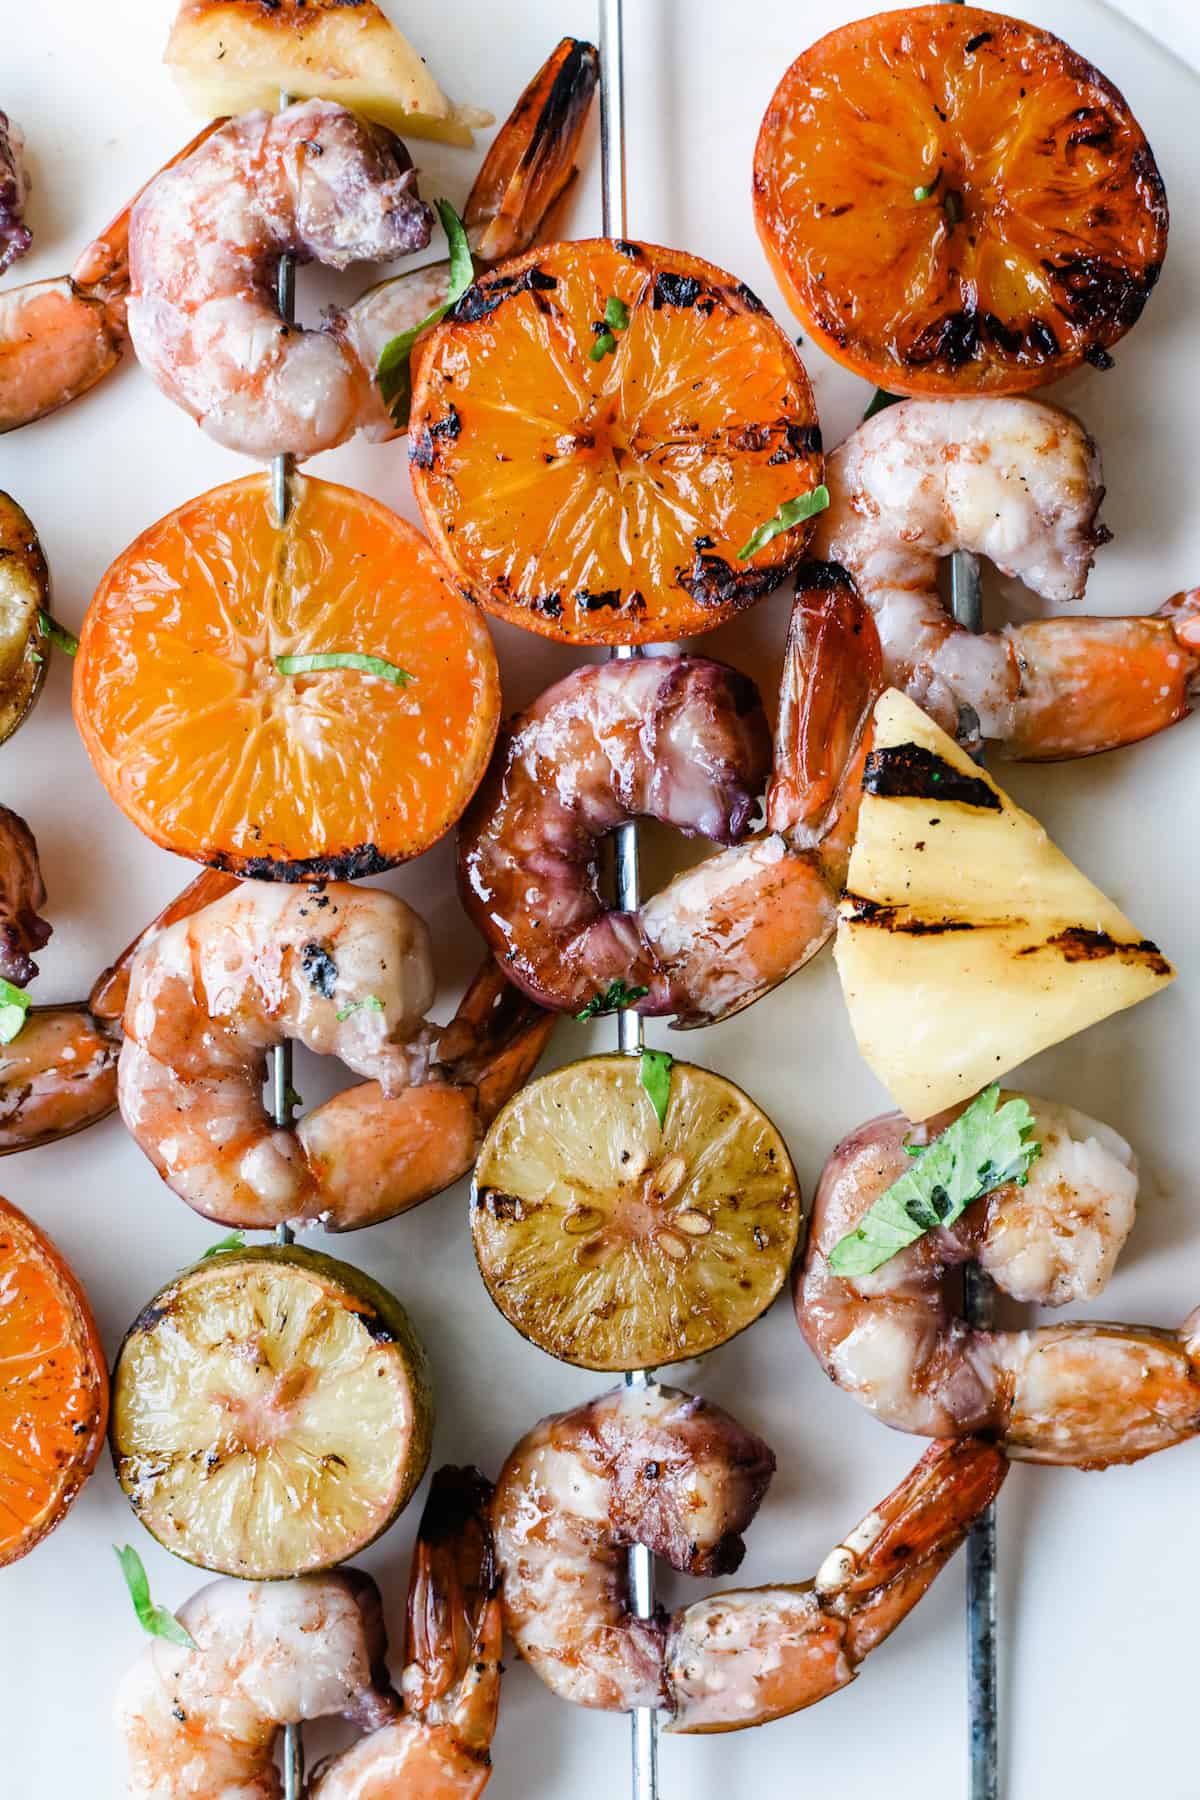 Grilled Shrimp Skewers in a red wine sangria marinade made with wine, orange liqueur, and citrus. Quick and easy these marinate while you wait for the grill to heat up— serve with steamed rice and a salad for a healthy dinner! #shrimp #shrimpskewers #grilledshrimp #healthydinner